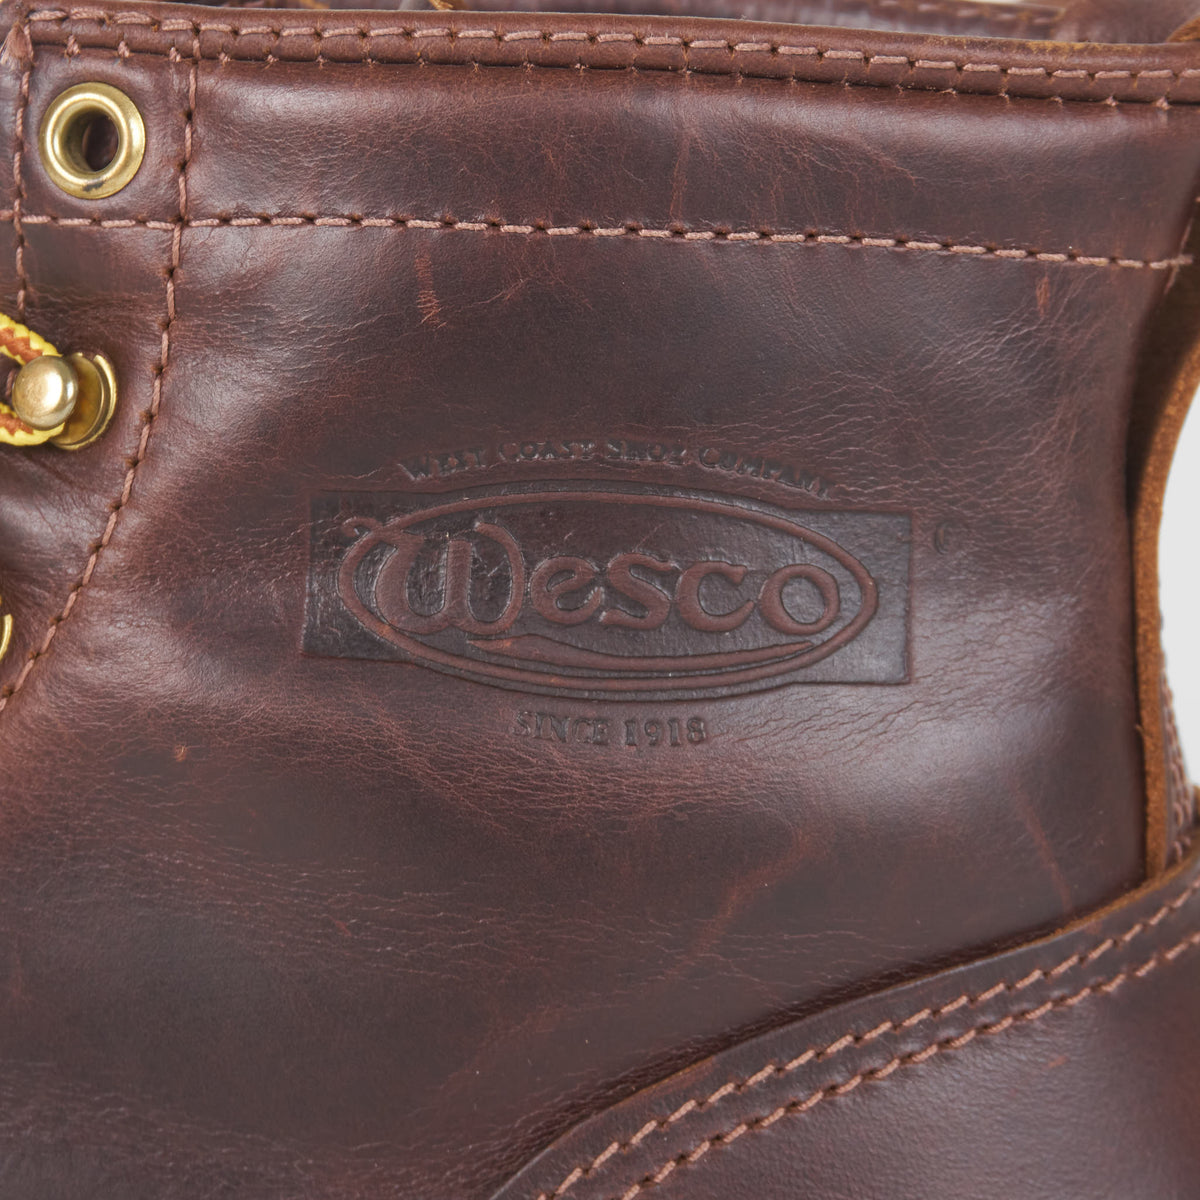 Wesco Custom Lace Up Waxed Leather Dress Boot